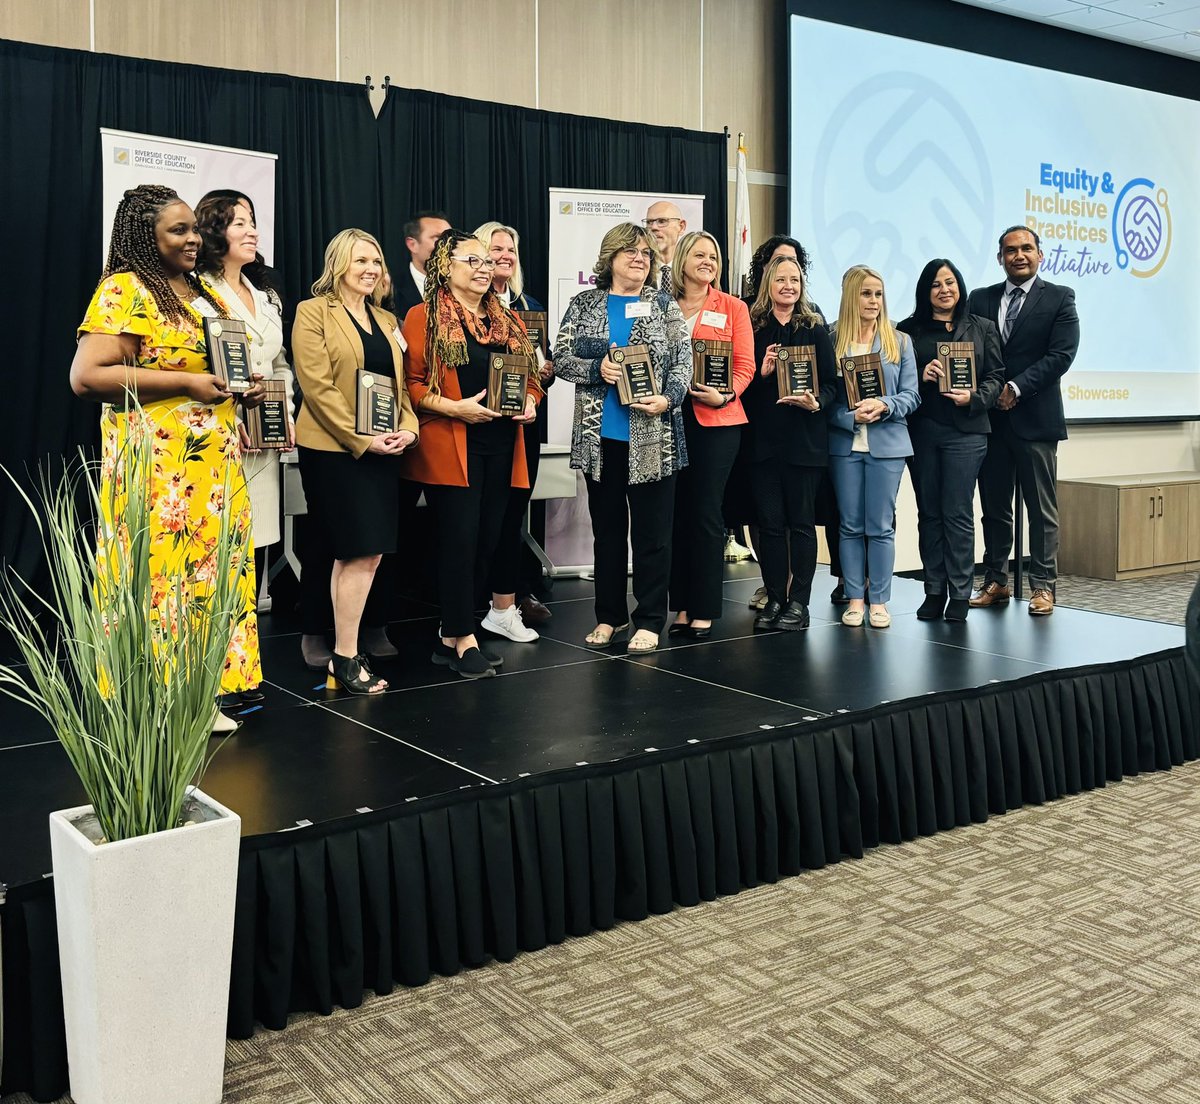 Earlier this week @MgodoyCorner were honored in accepting an award for @BRESBulldogs for all the amazing #equity and #inclusion work happening on the school site! This award represents the value our teachers and staff have in ensuring each and every student succeeds.